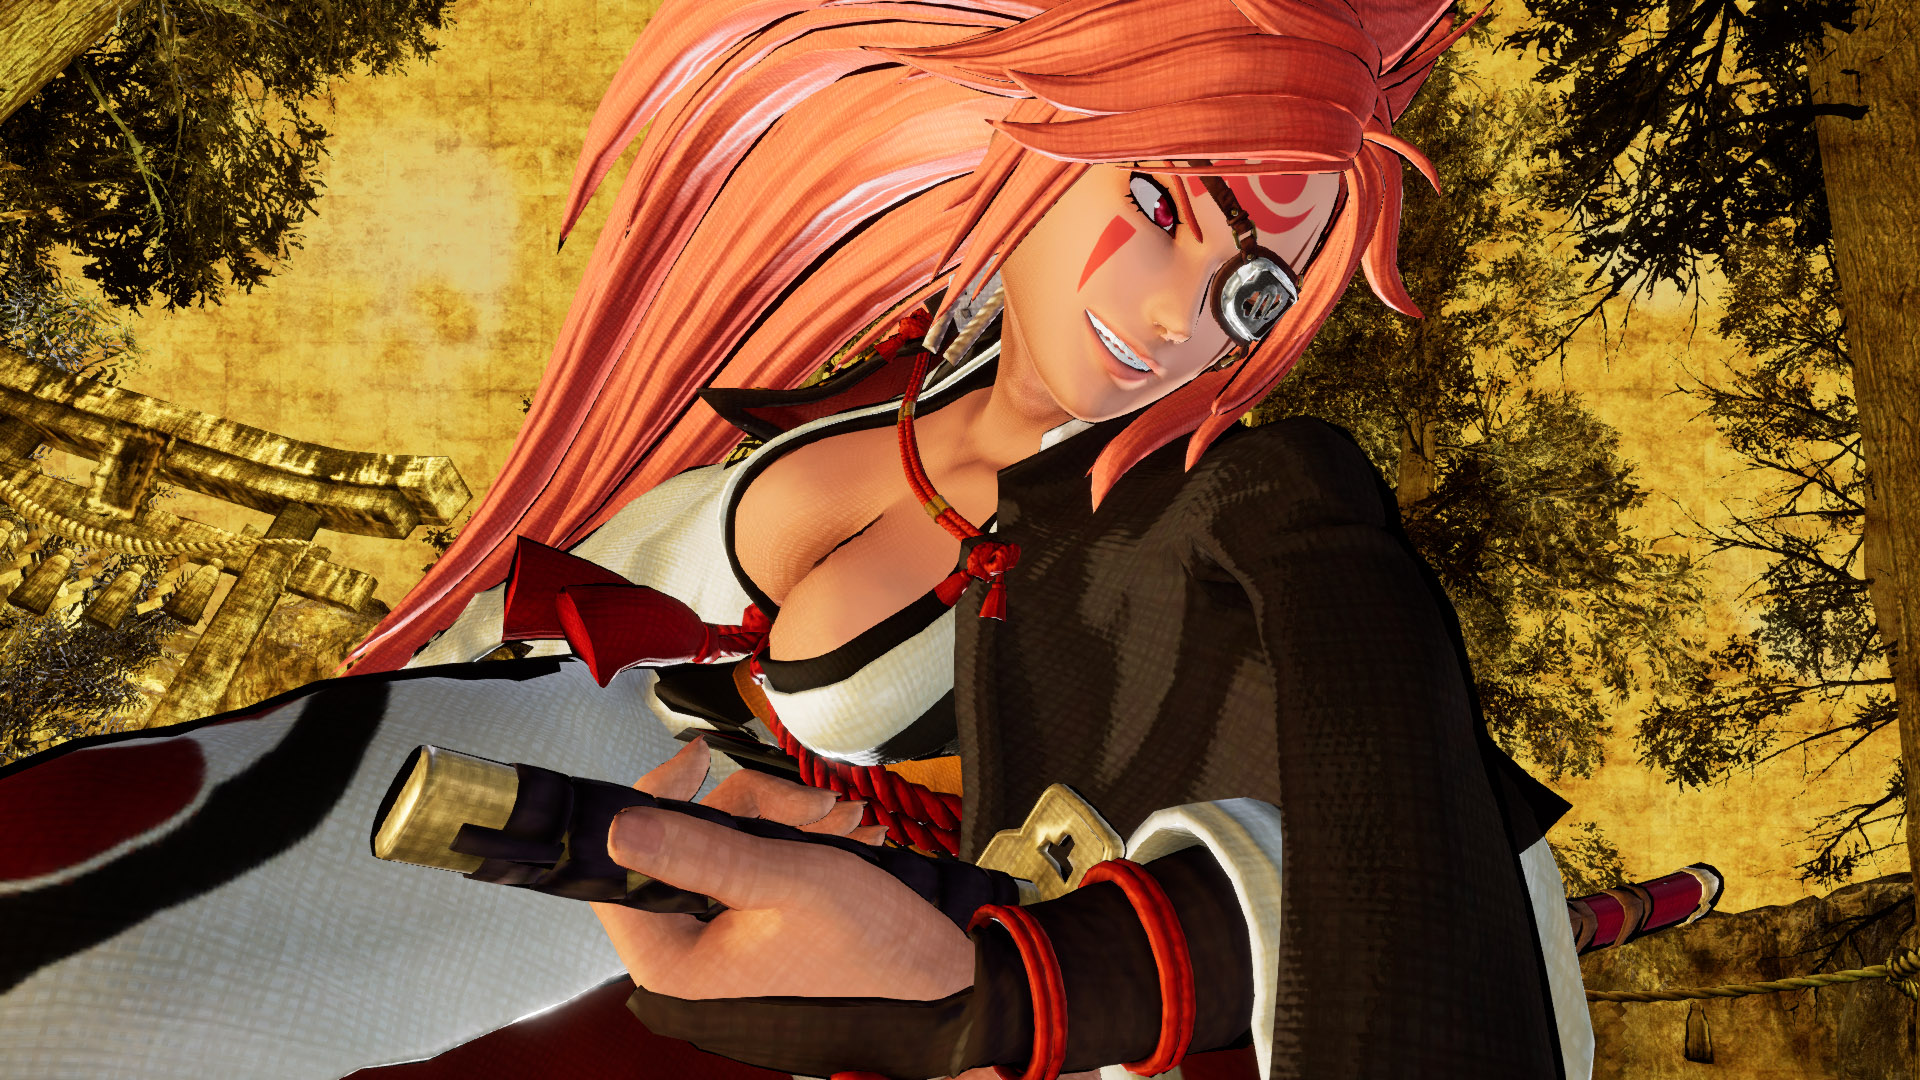 Baiken from Guilty Gear joins Samurai Shodown and appears in new trailer